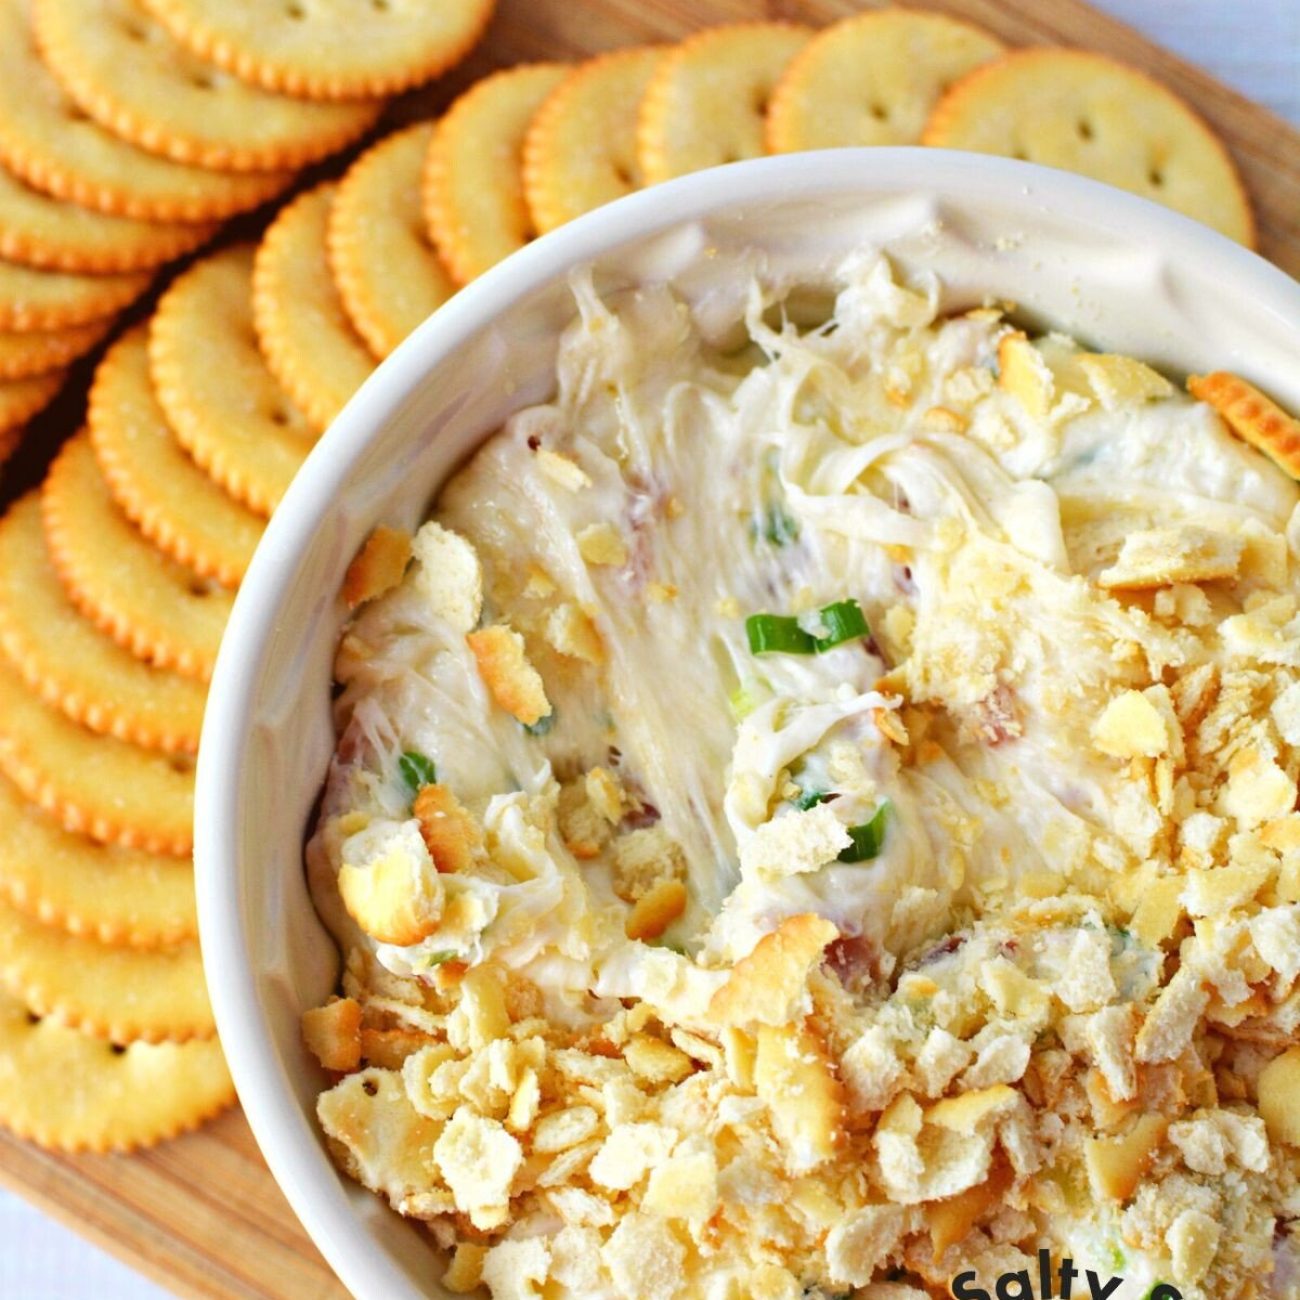 Creamy Swiss Cheese Dip Delight: A Warm, Irresistible Appetizer